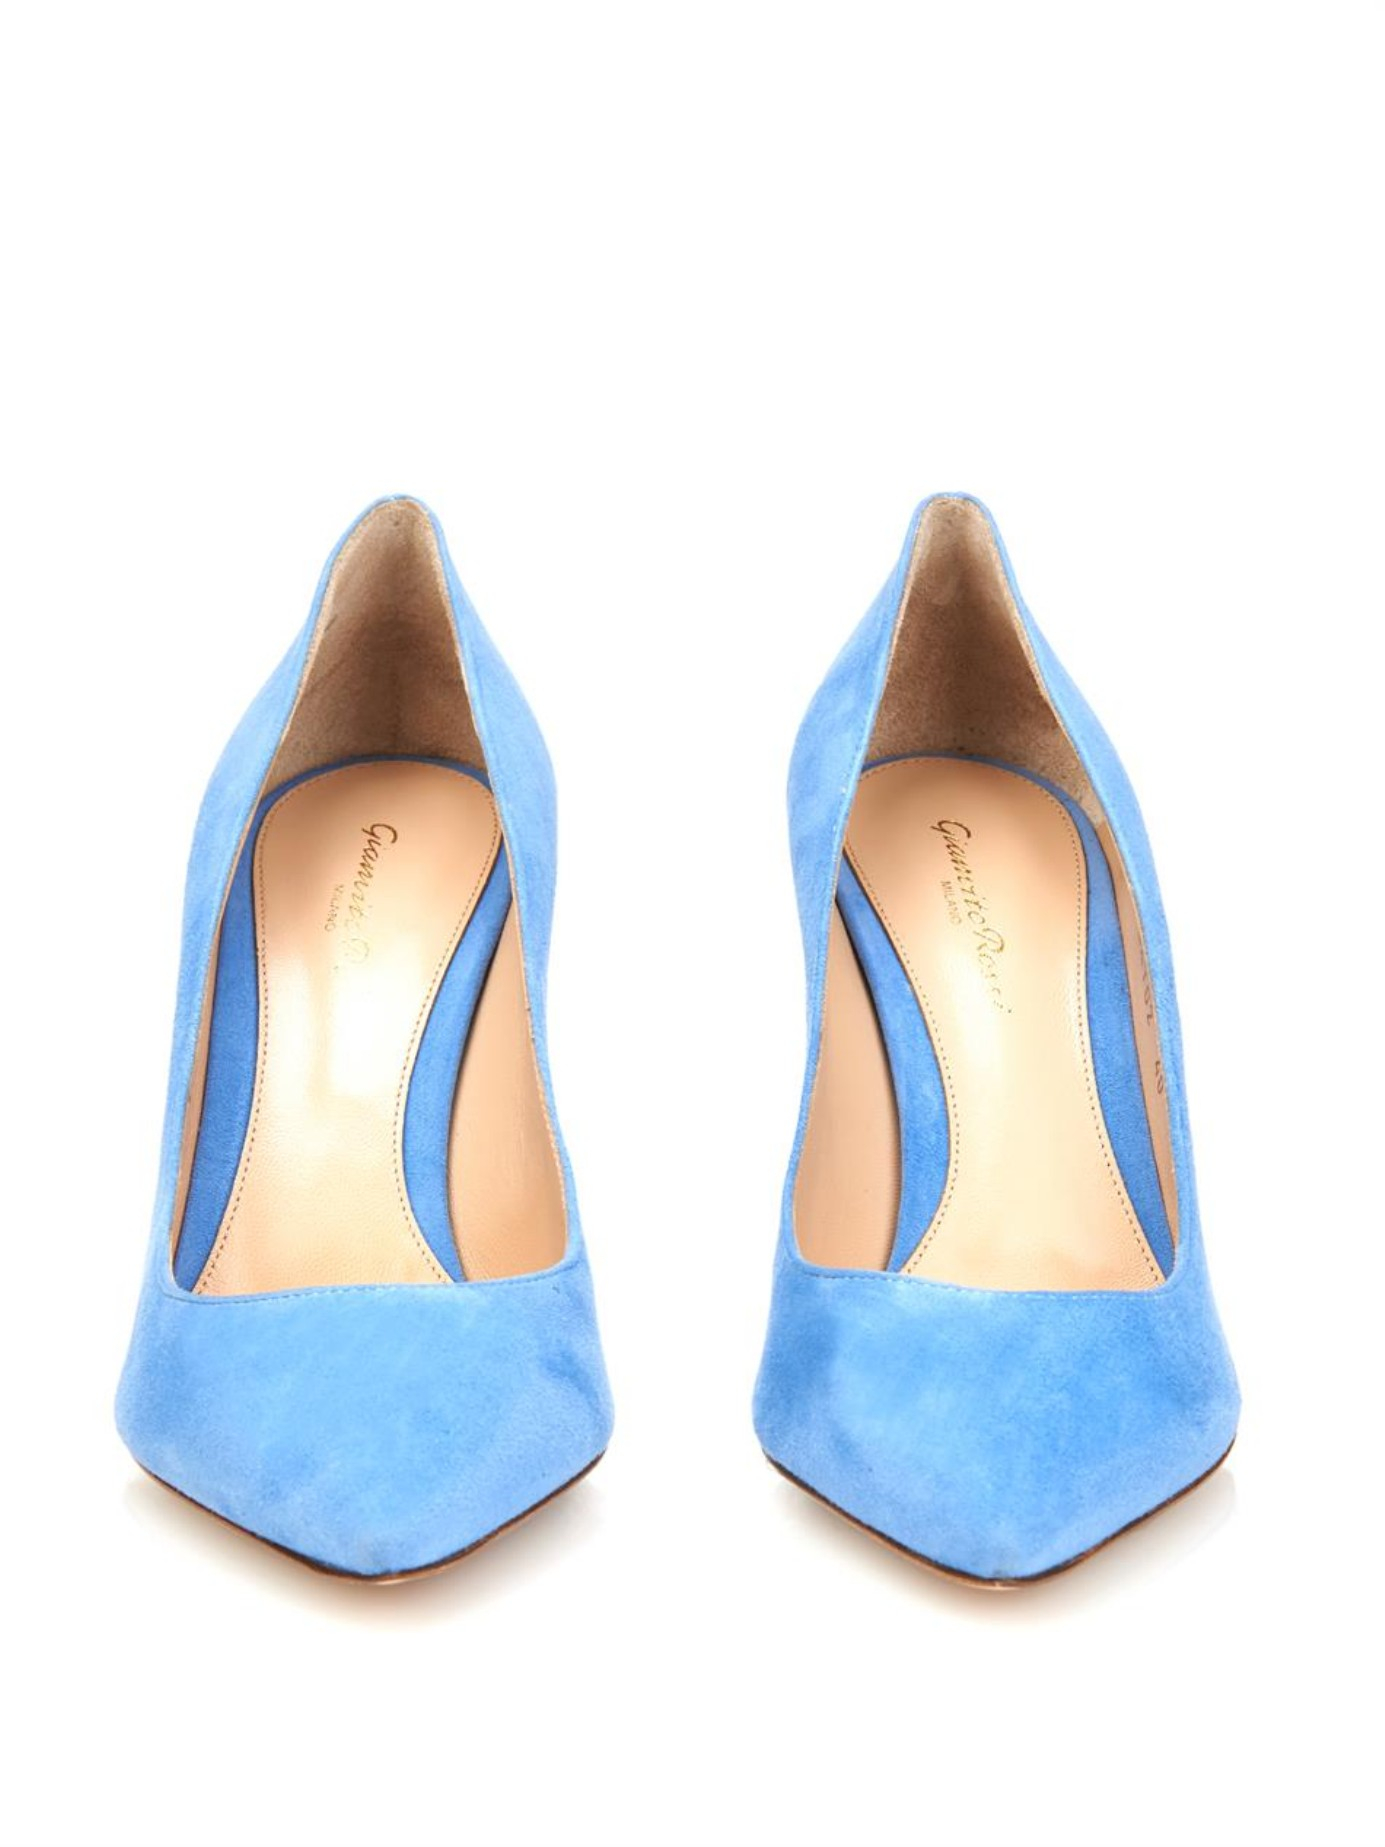 Point-Toe Suede Pumps in Light Blue 